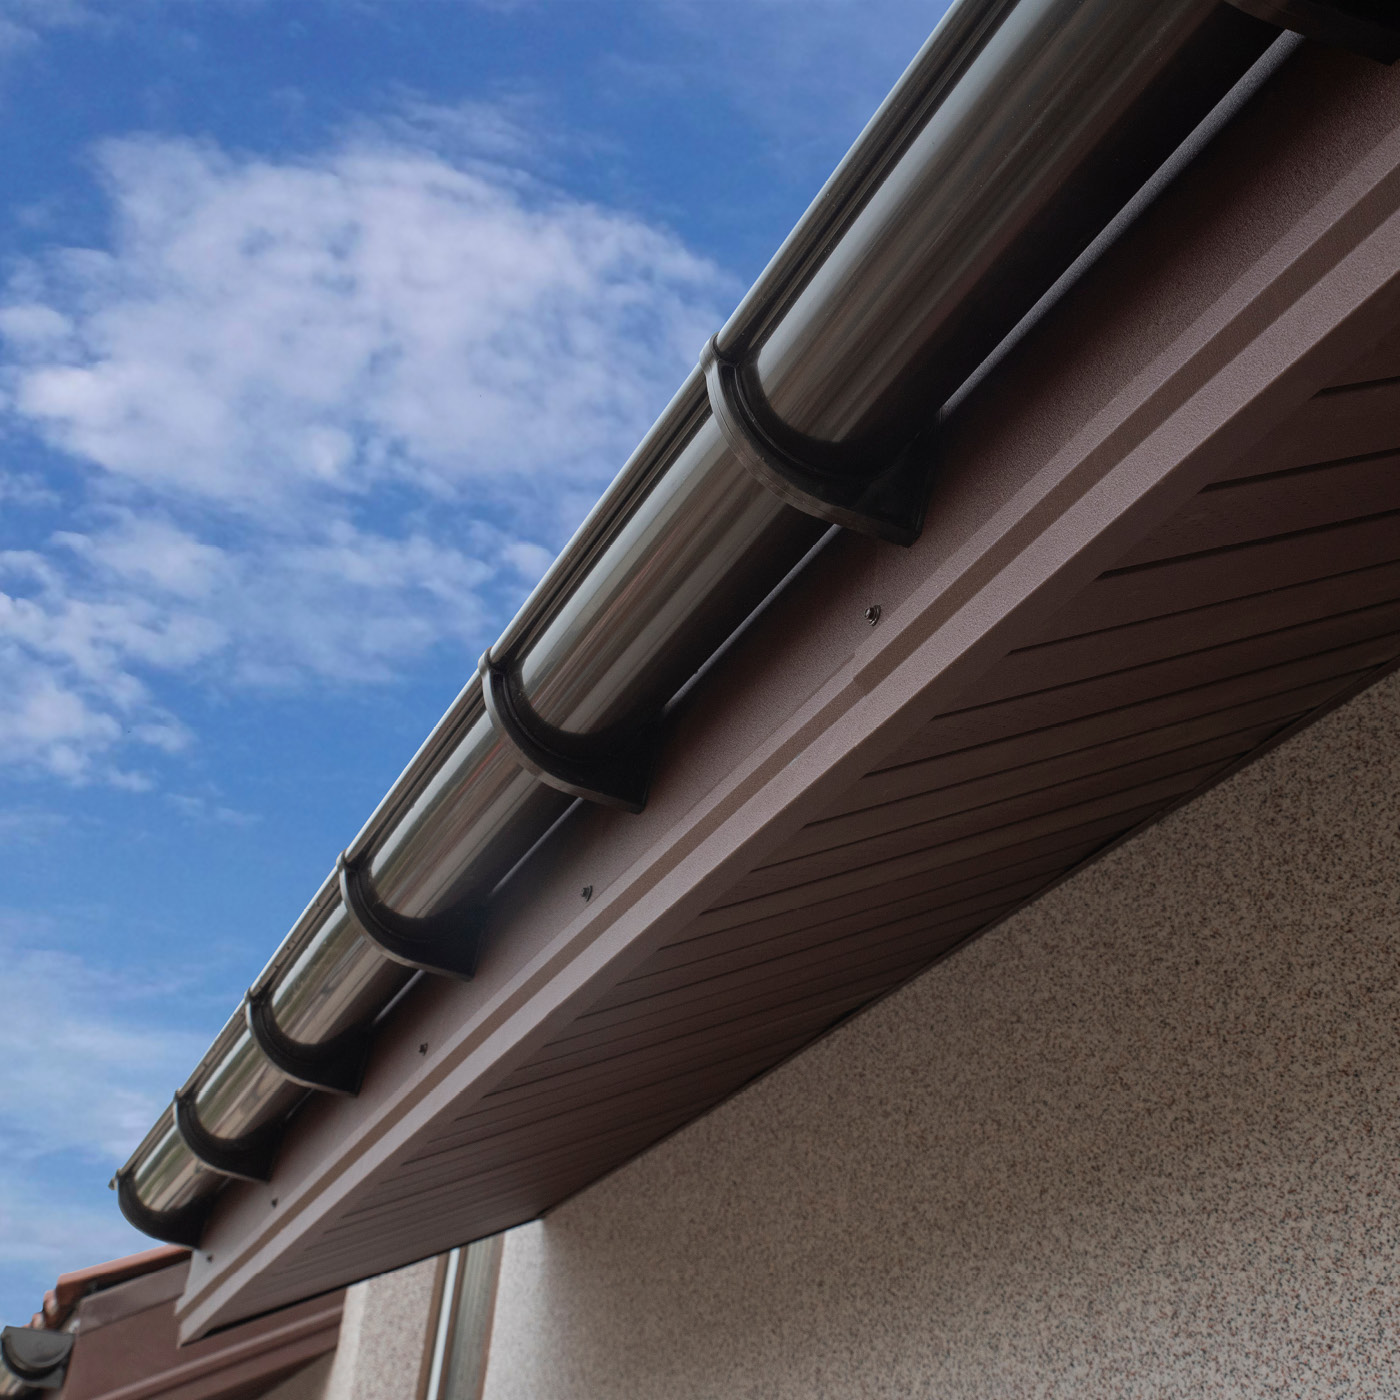 With precolor colored PVC gutter on house